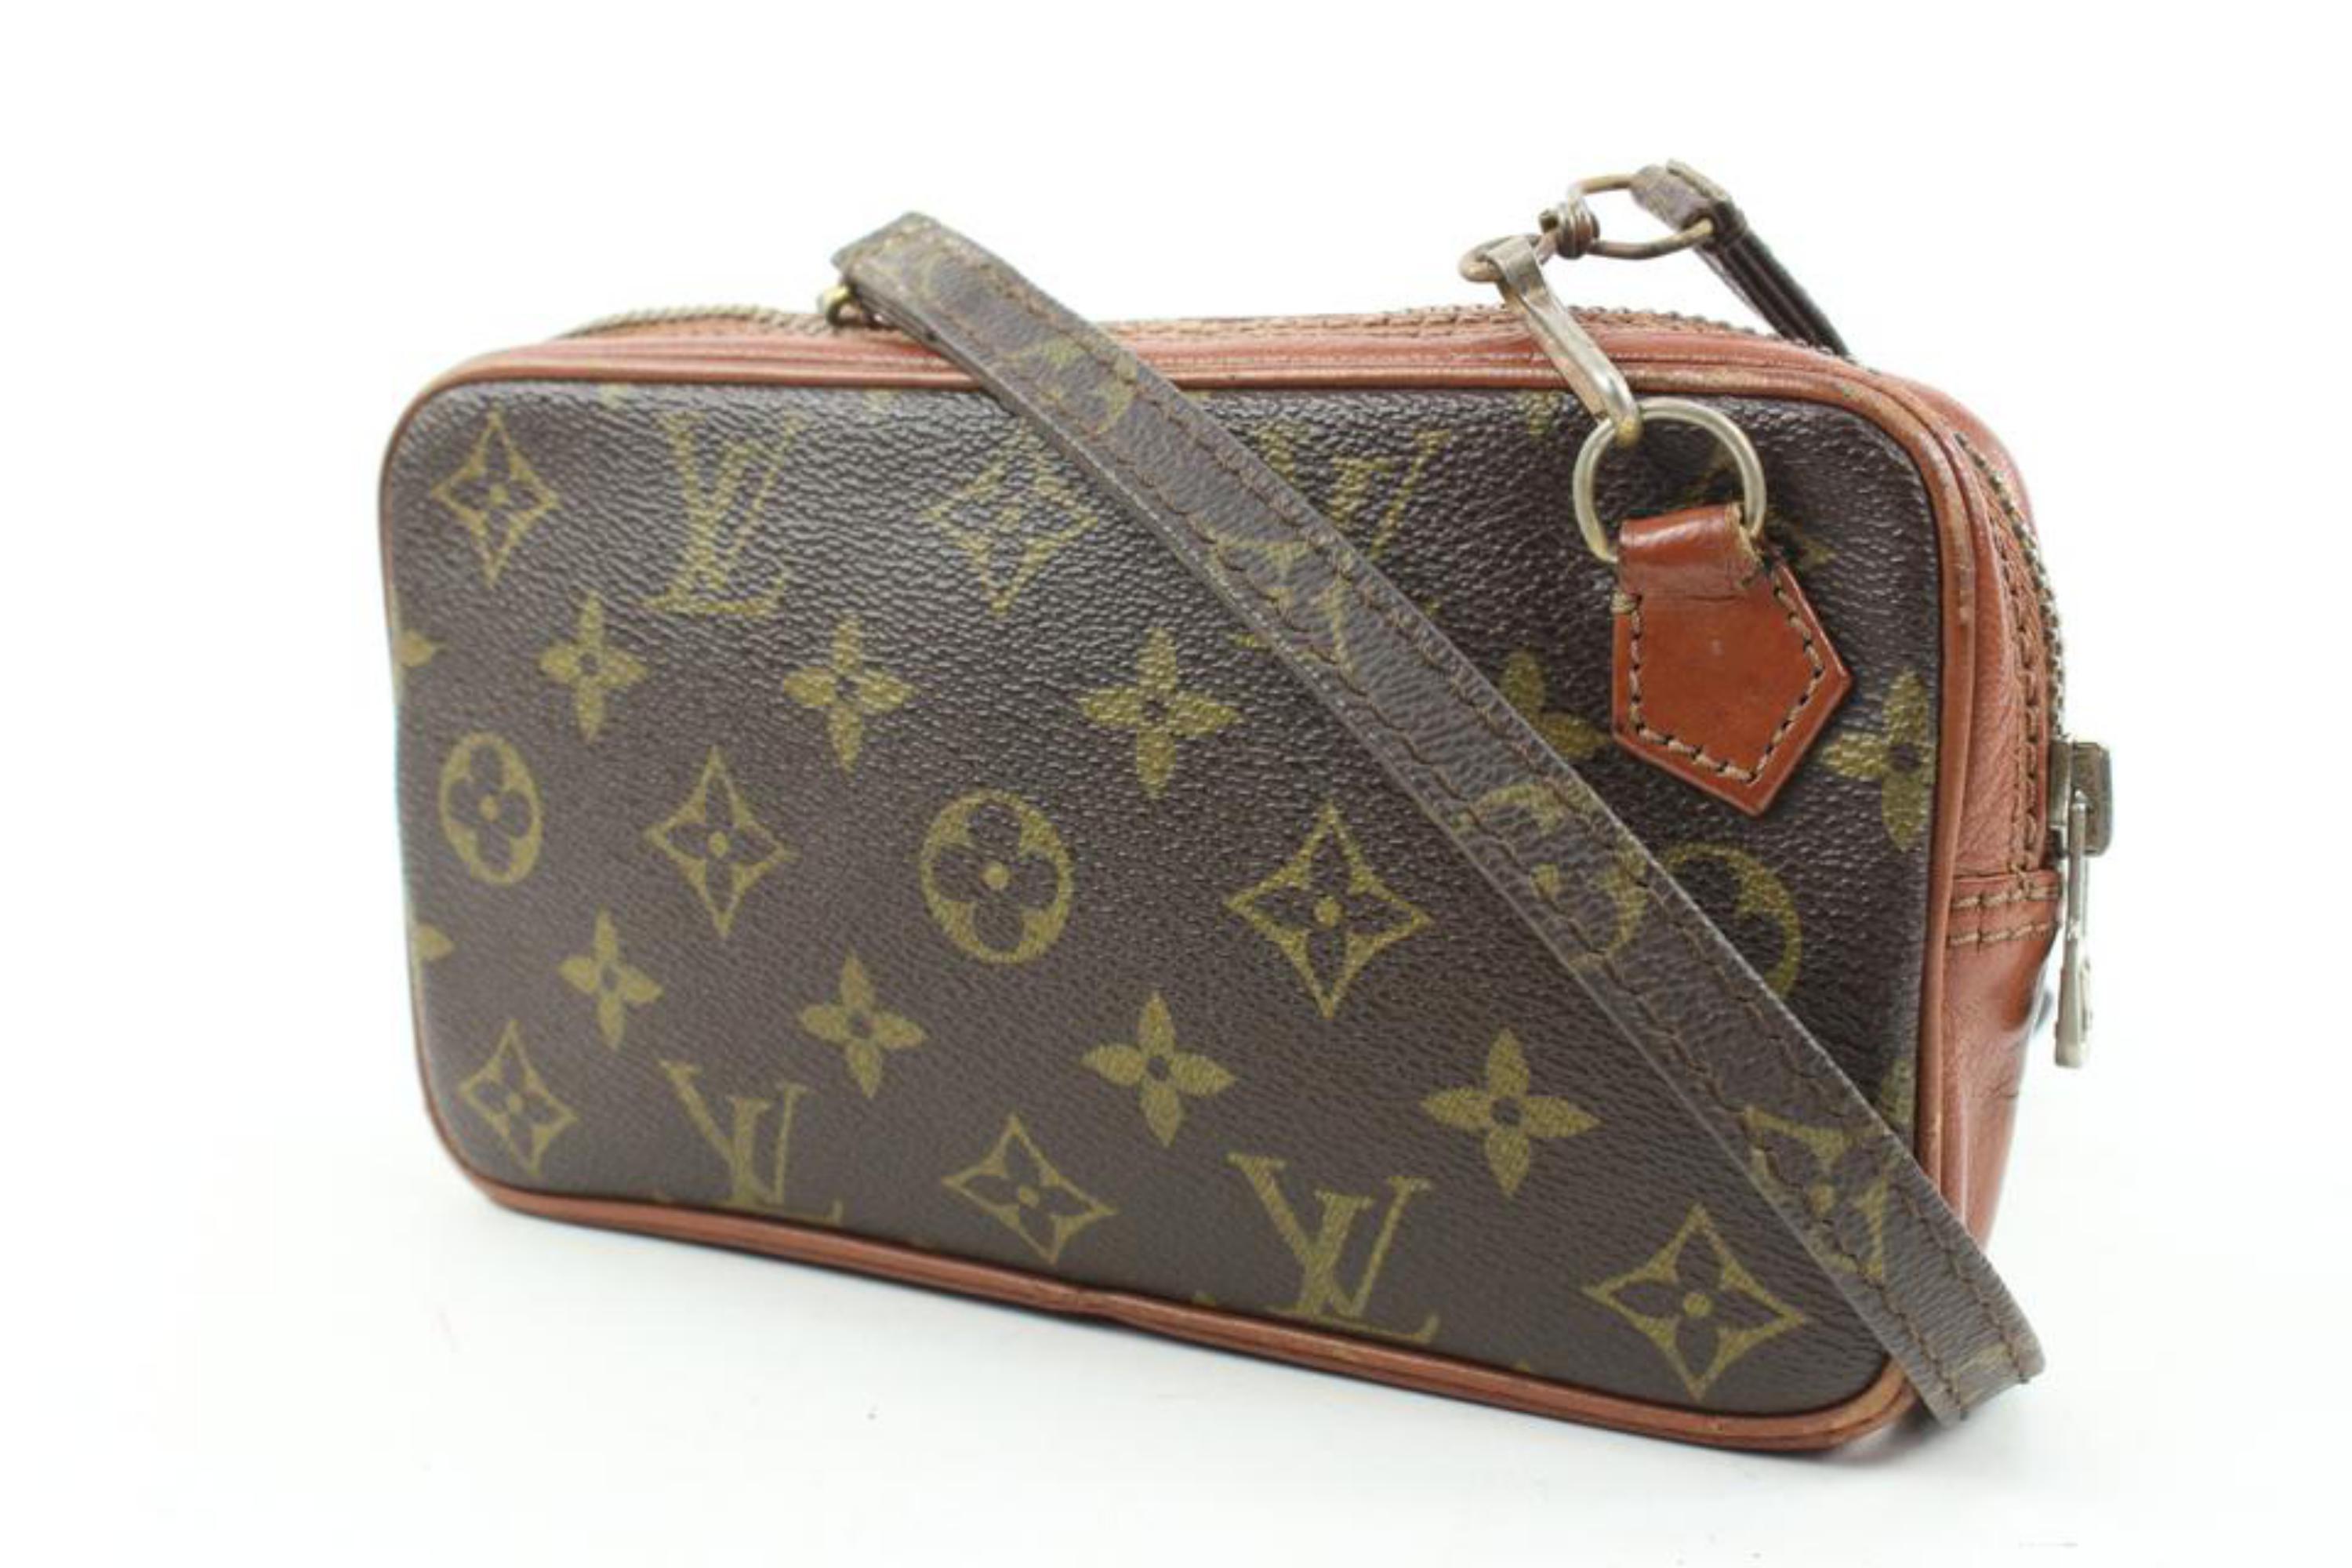 Louis Vuitton Vintage Monogram Pochette Marly Bandouliere 28lv127s
Date Code/Serial Number: 841
Made In: France
Measurements: Length:  8